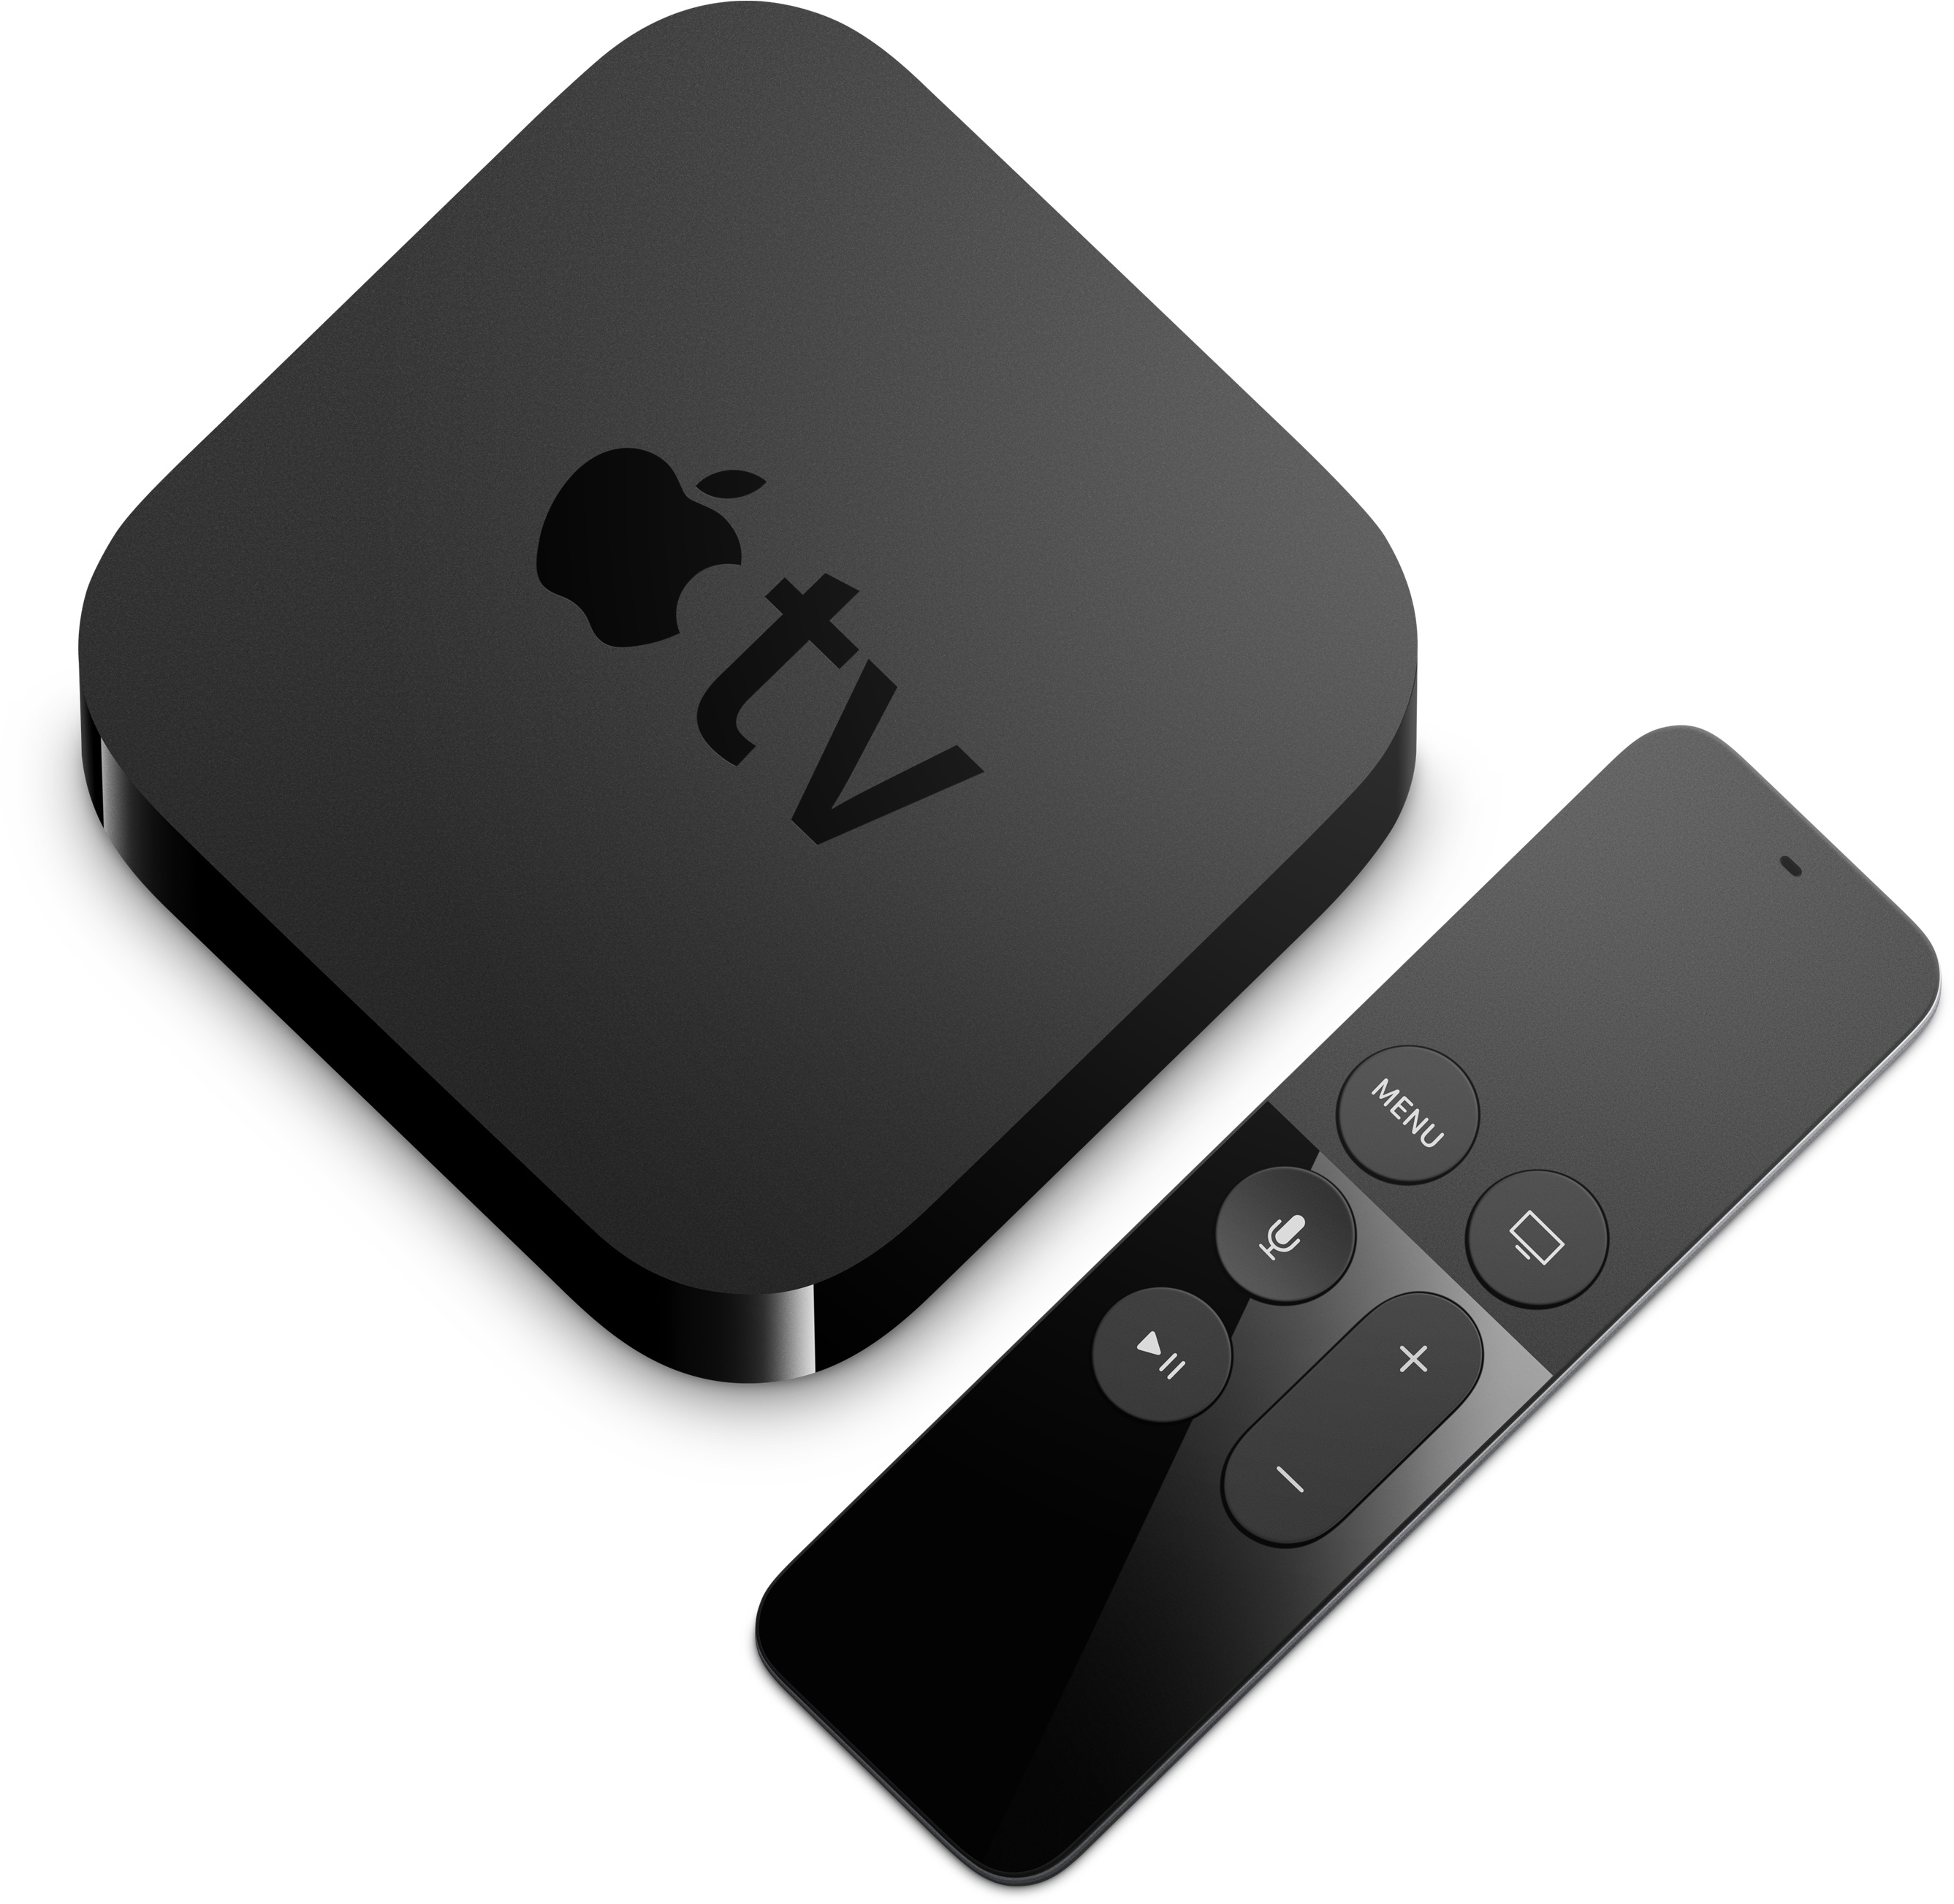 Should you order your Apple TV with 32GB or 64GB of storage?